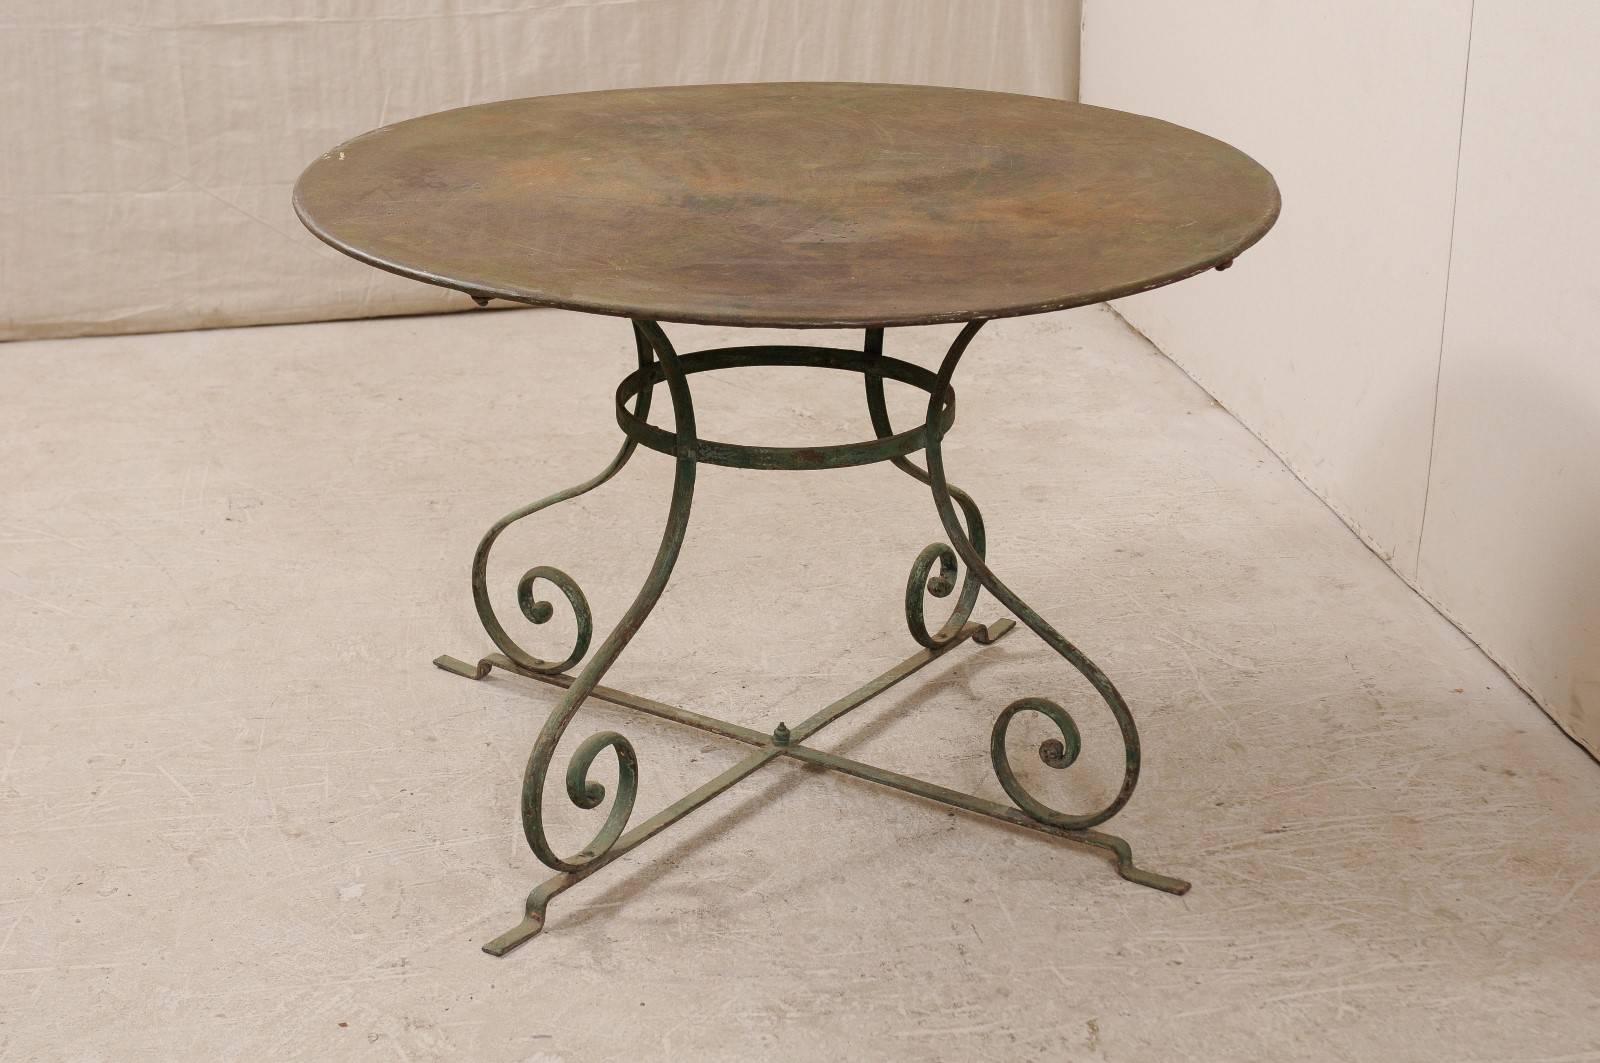 Painted French Mid-20th Century Round Patio Dining Table with Scrolled Legs and Patina